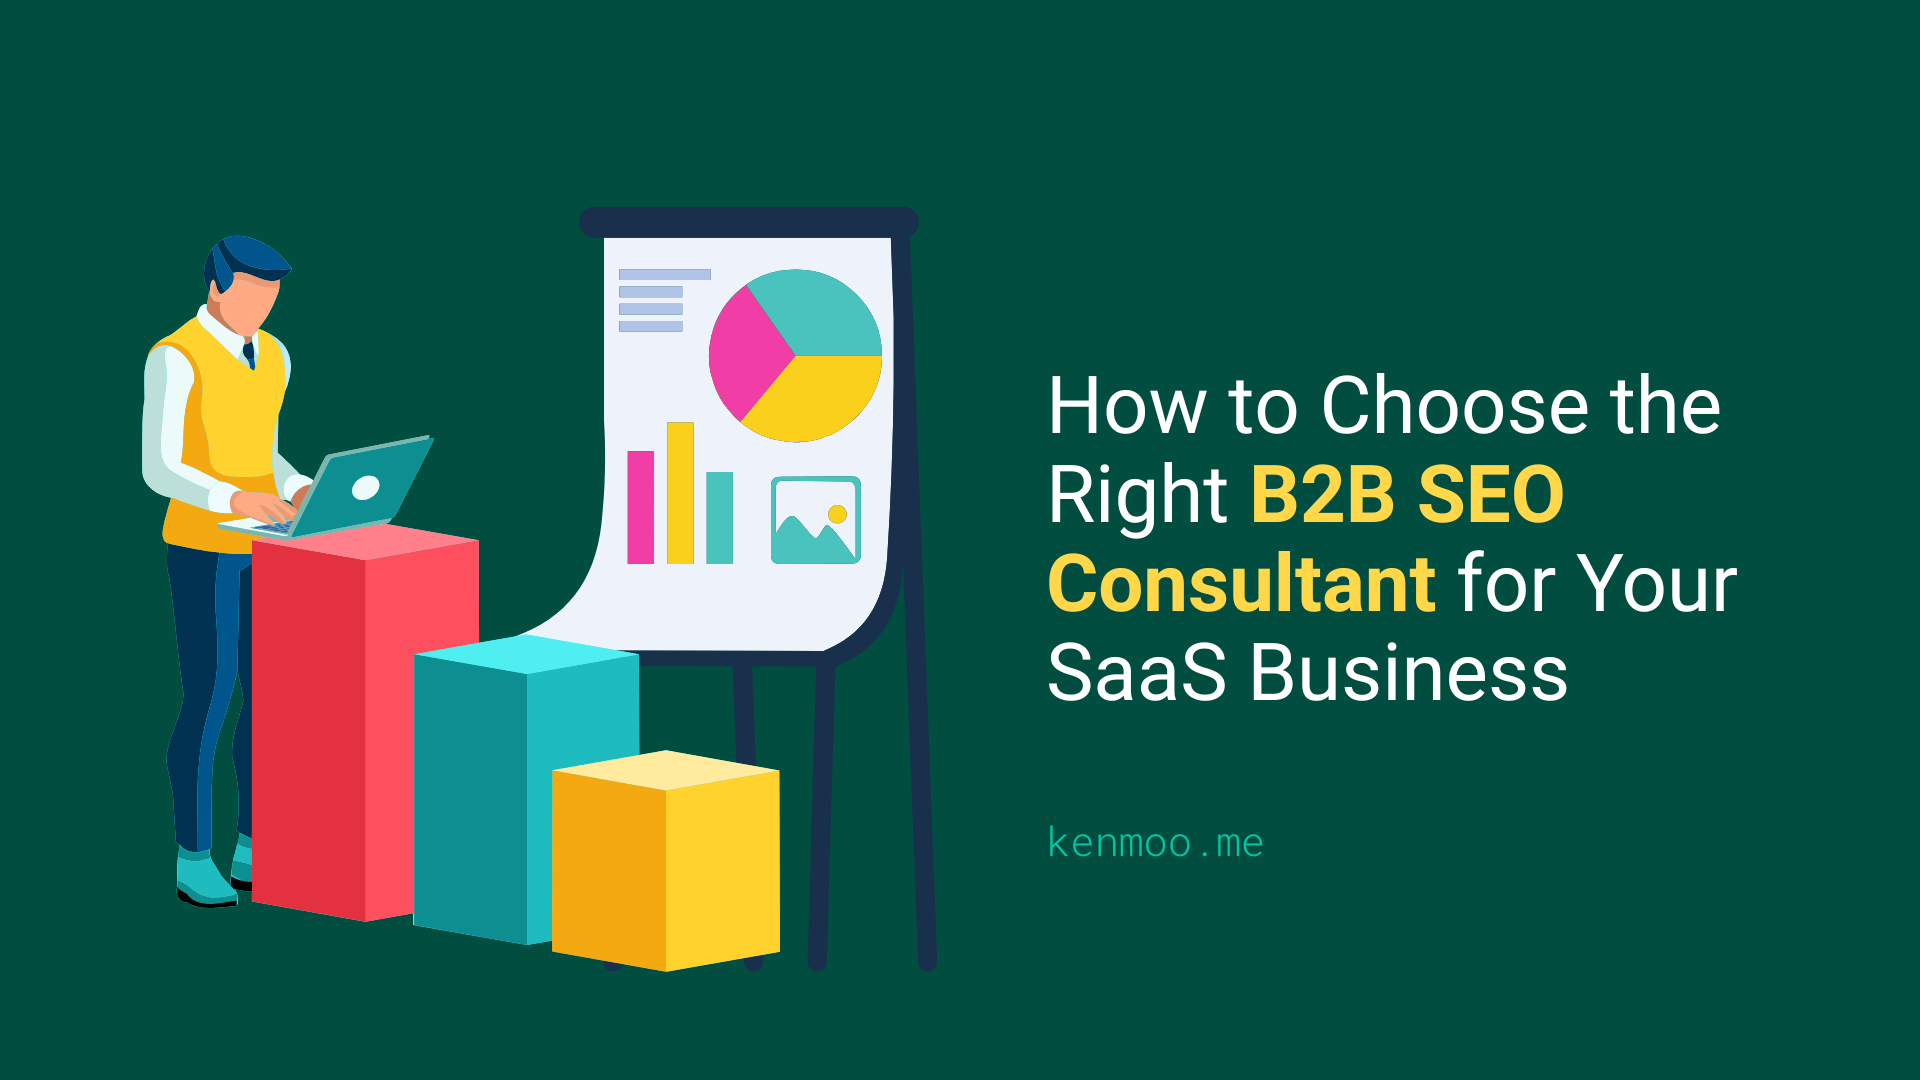 How to Choose the Right B2B SEO Consultant for Your SaaS Business